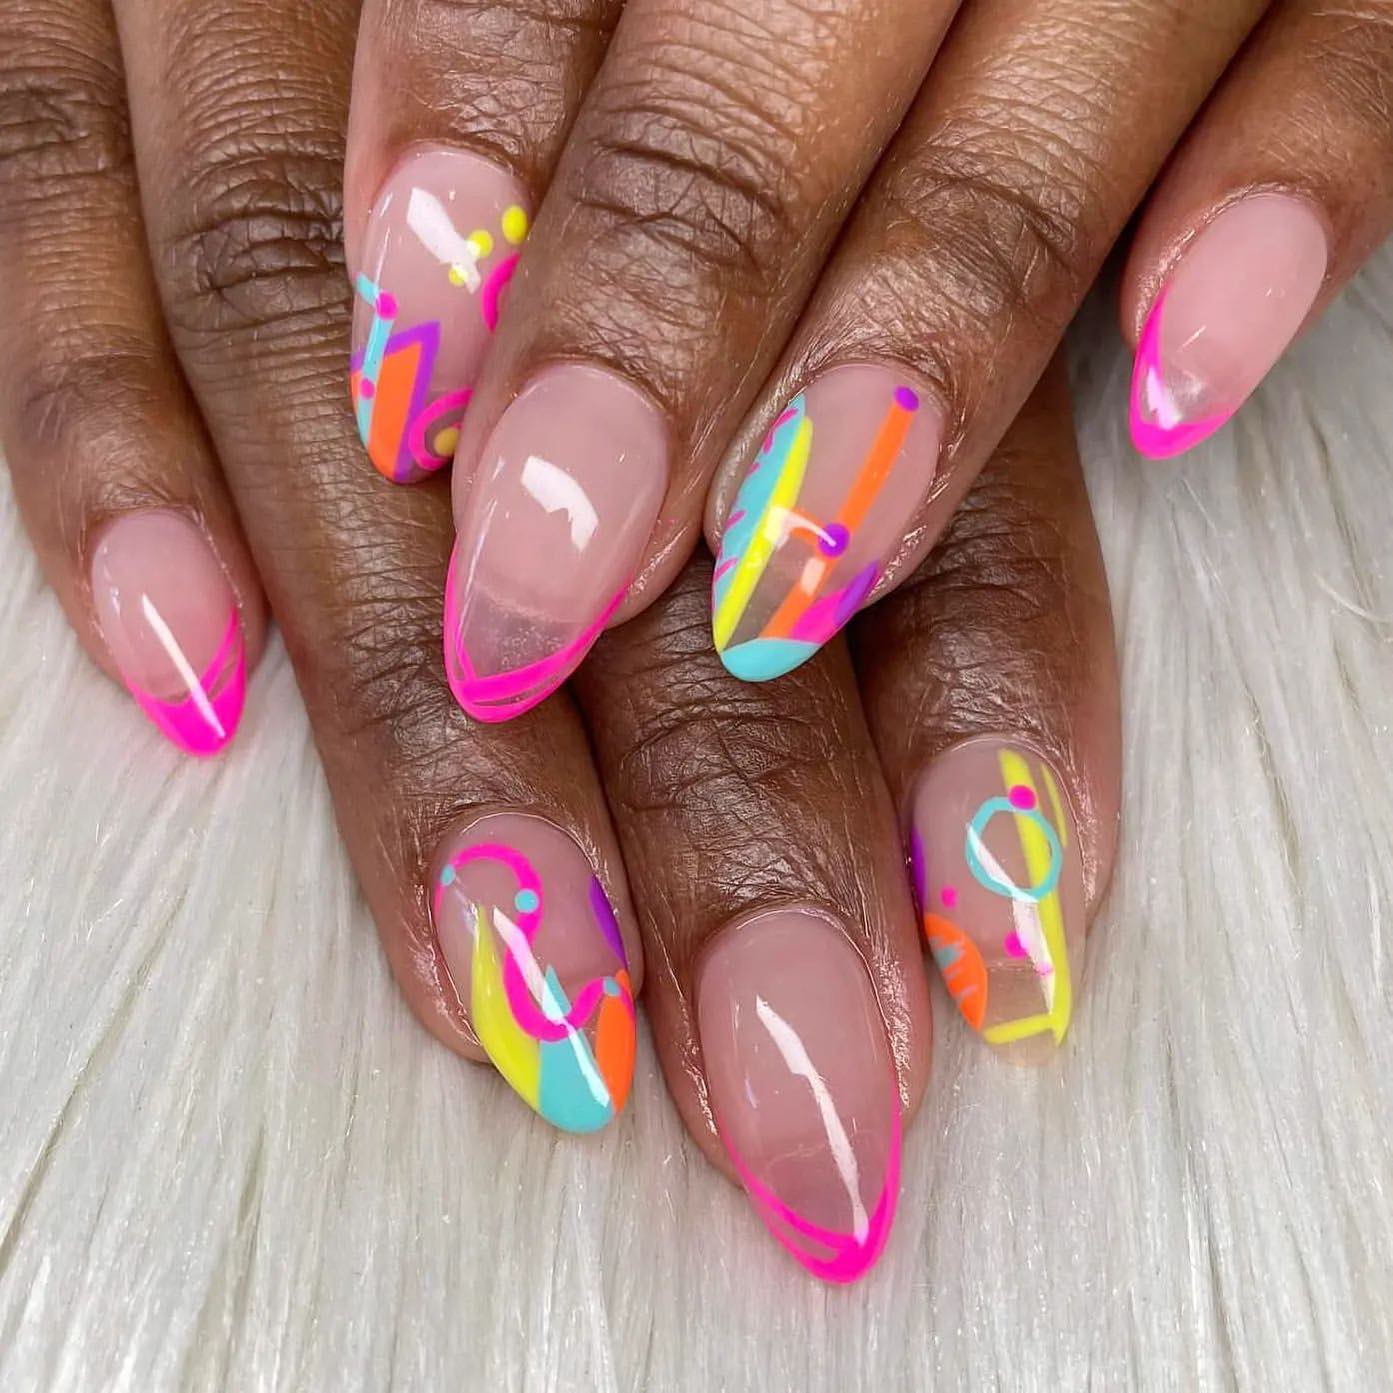 Some random lines and shapes can take your almond nails to a whole different level, especially when neon colors are used in this design.